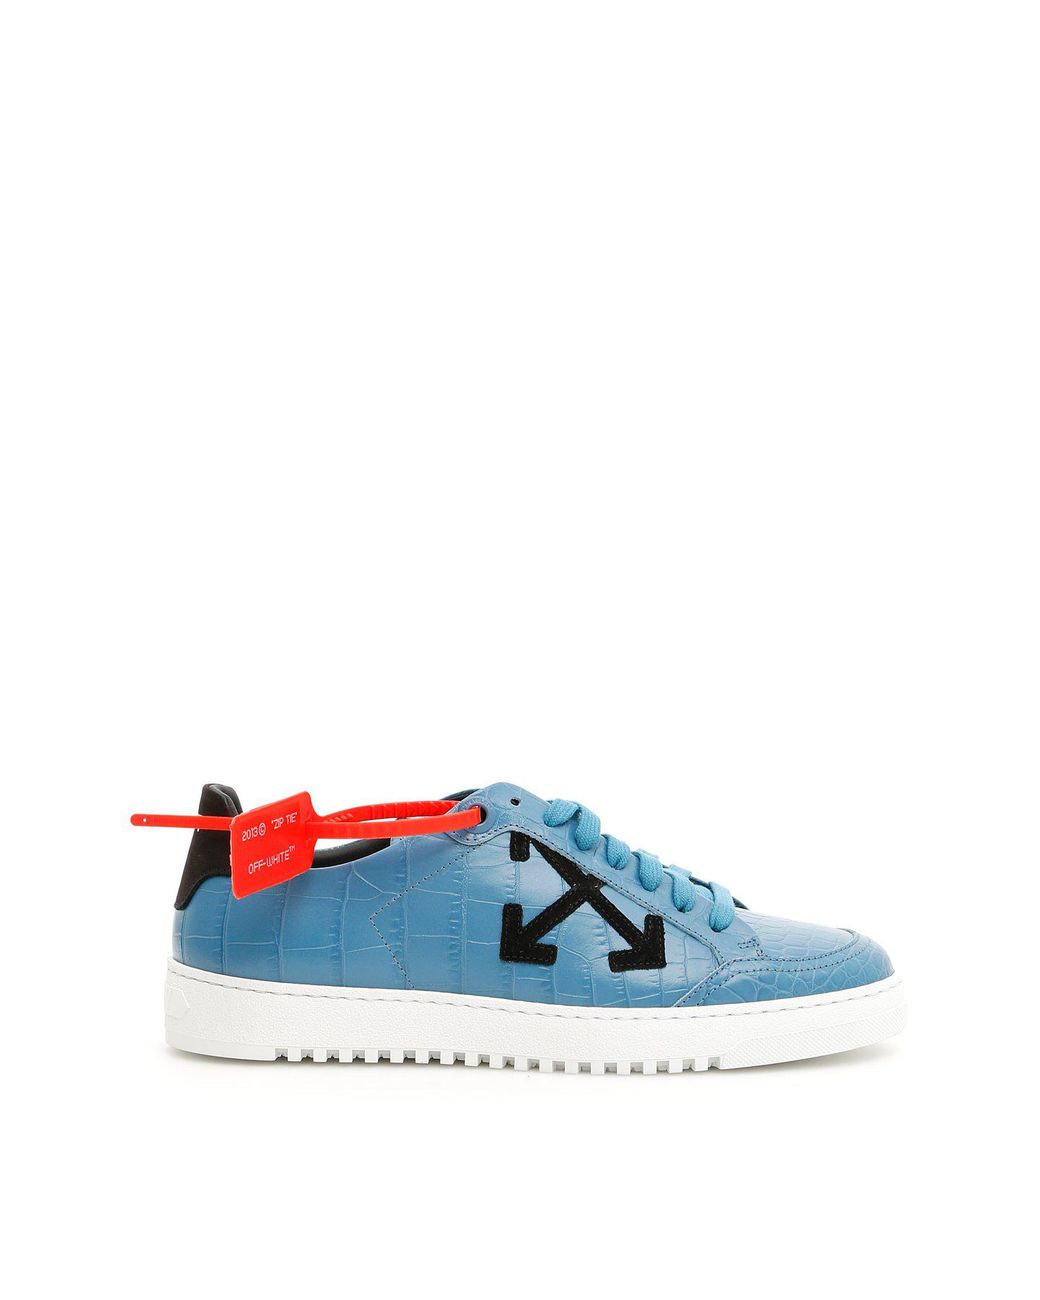 Off-White c/o Virgil Abloh Croc Effect 3.0 Sneakers in Blue | Lyst